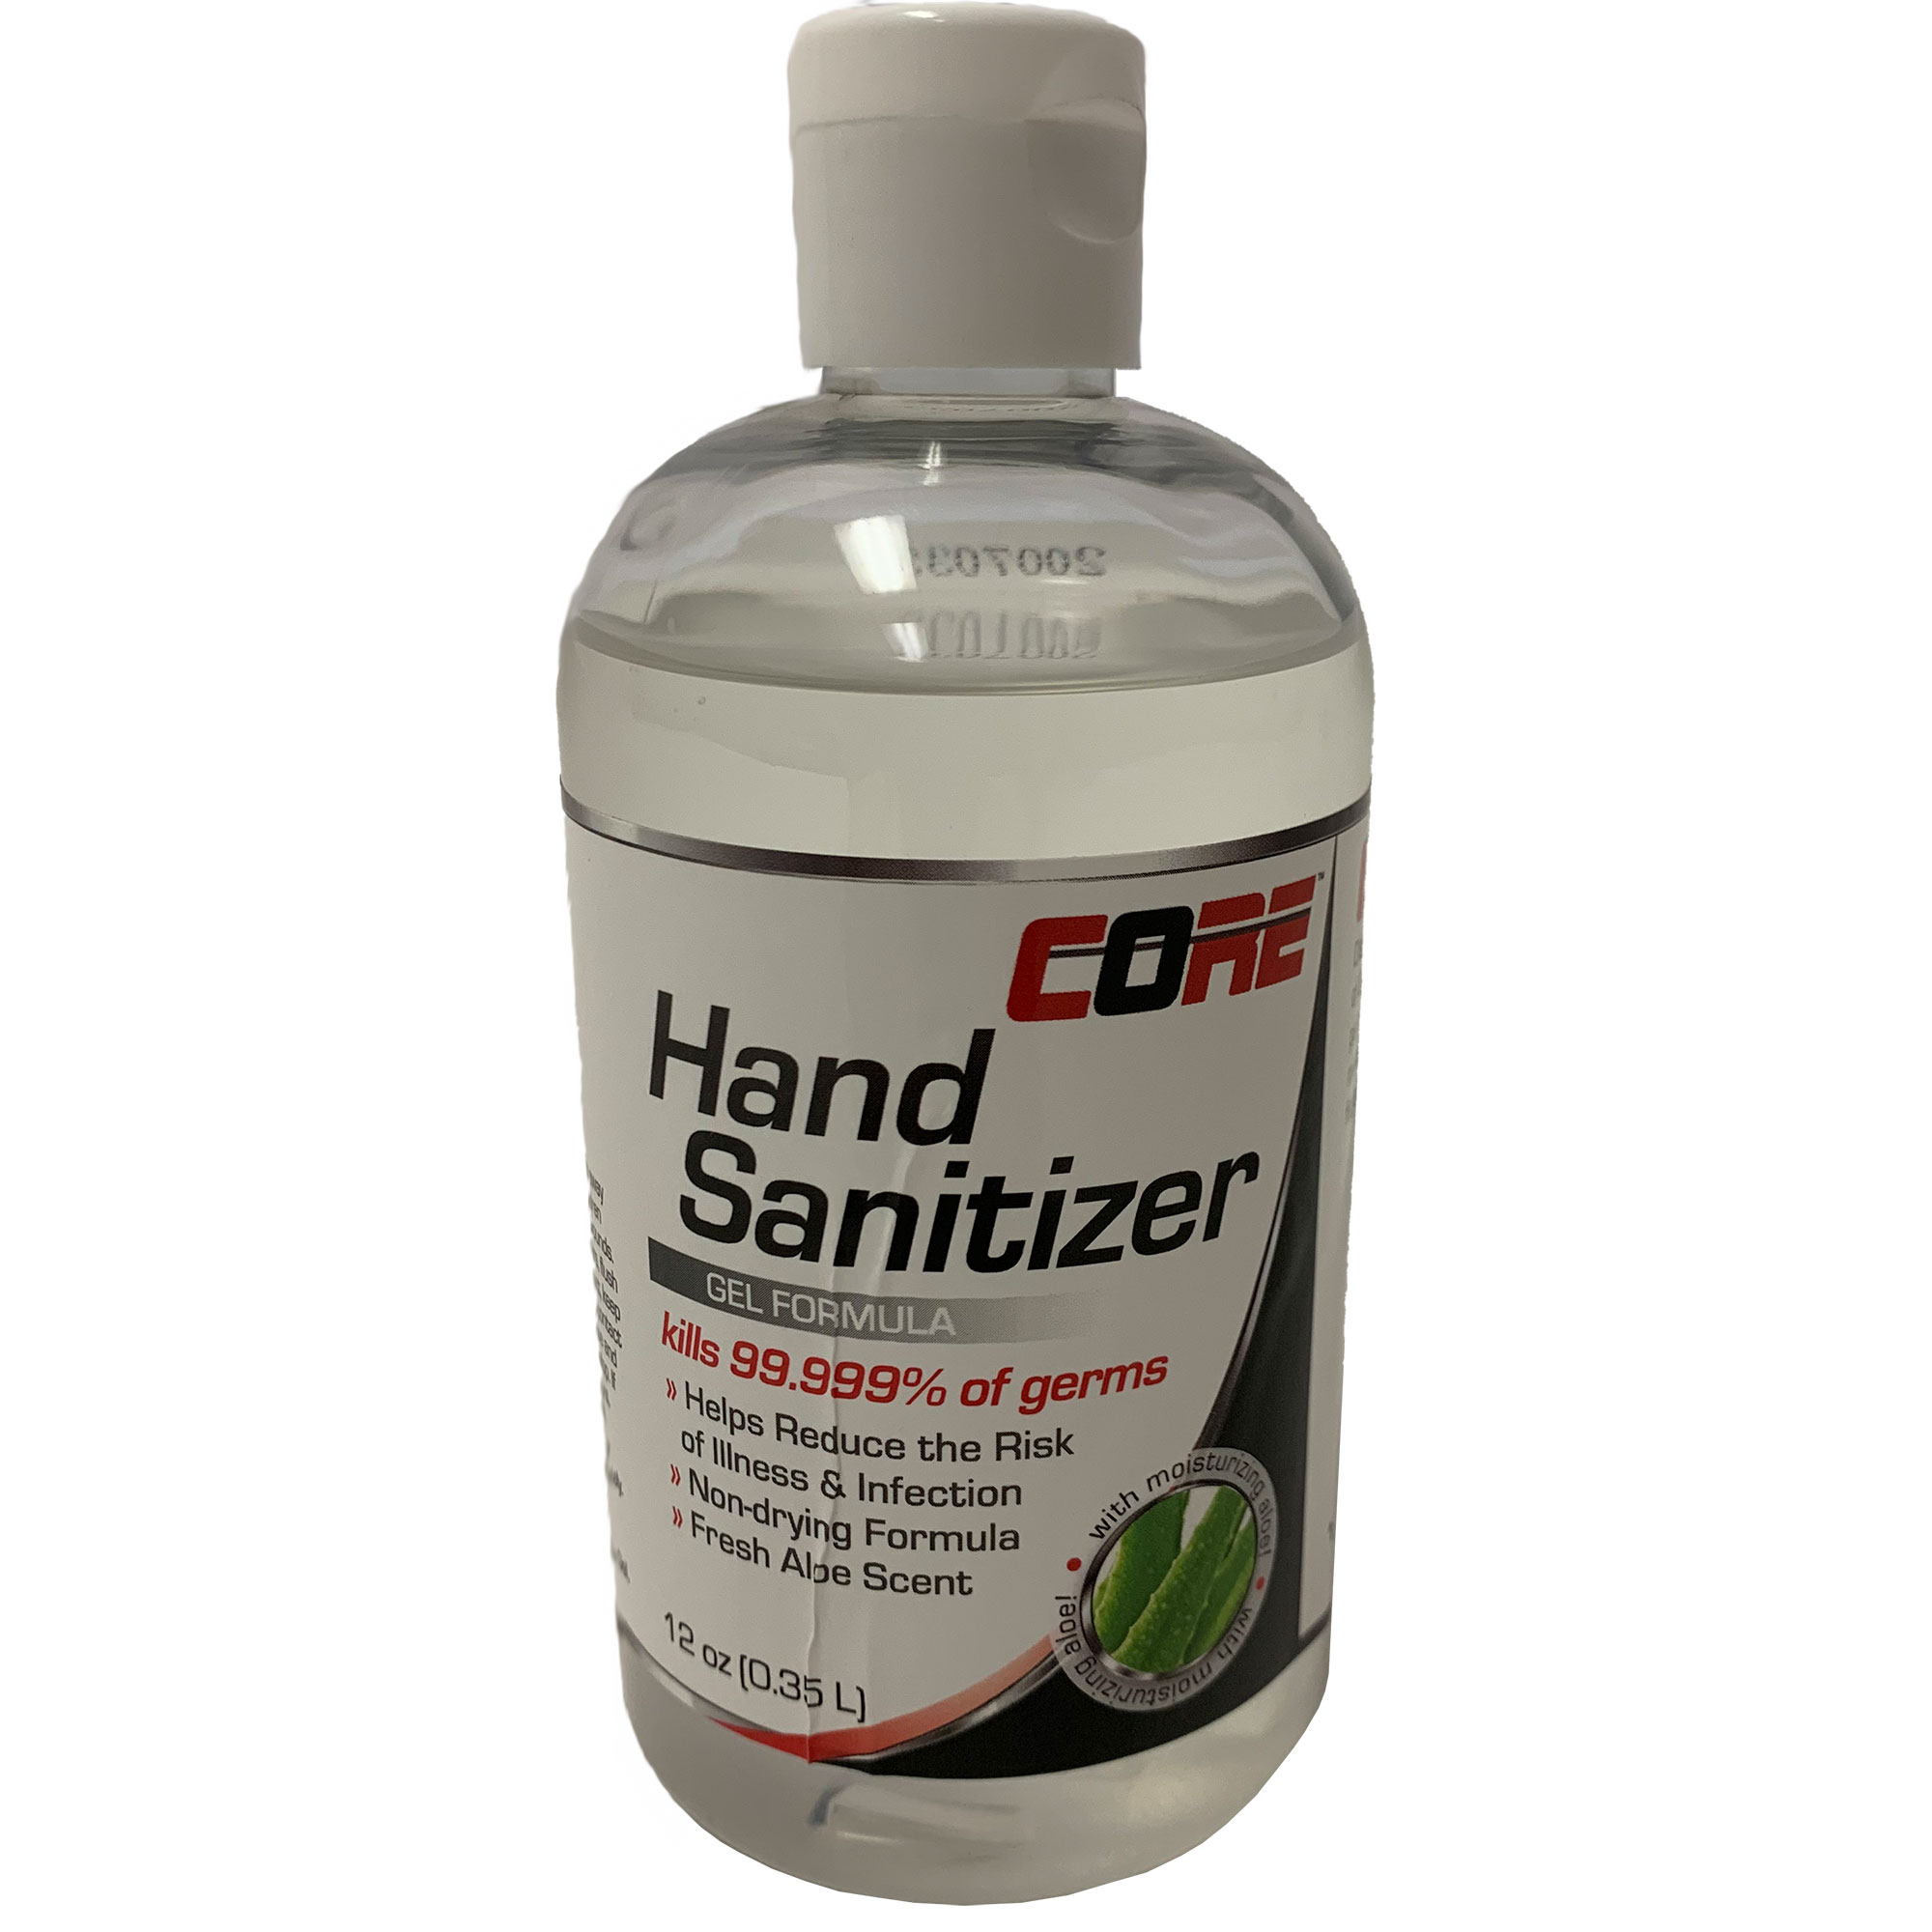 Core Hand Sanitizer Gel with Aloe, Kills 99.999% of Germs, 12oz Flip-Top Squeeze Bottle, Case of 12 Bottles